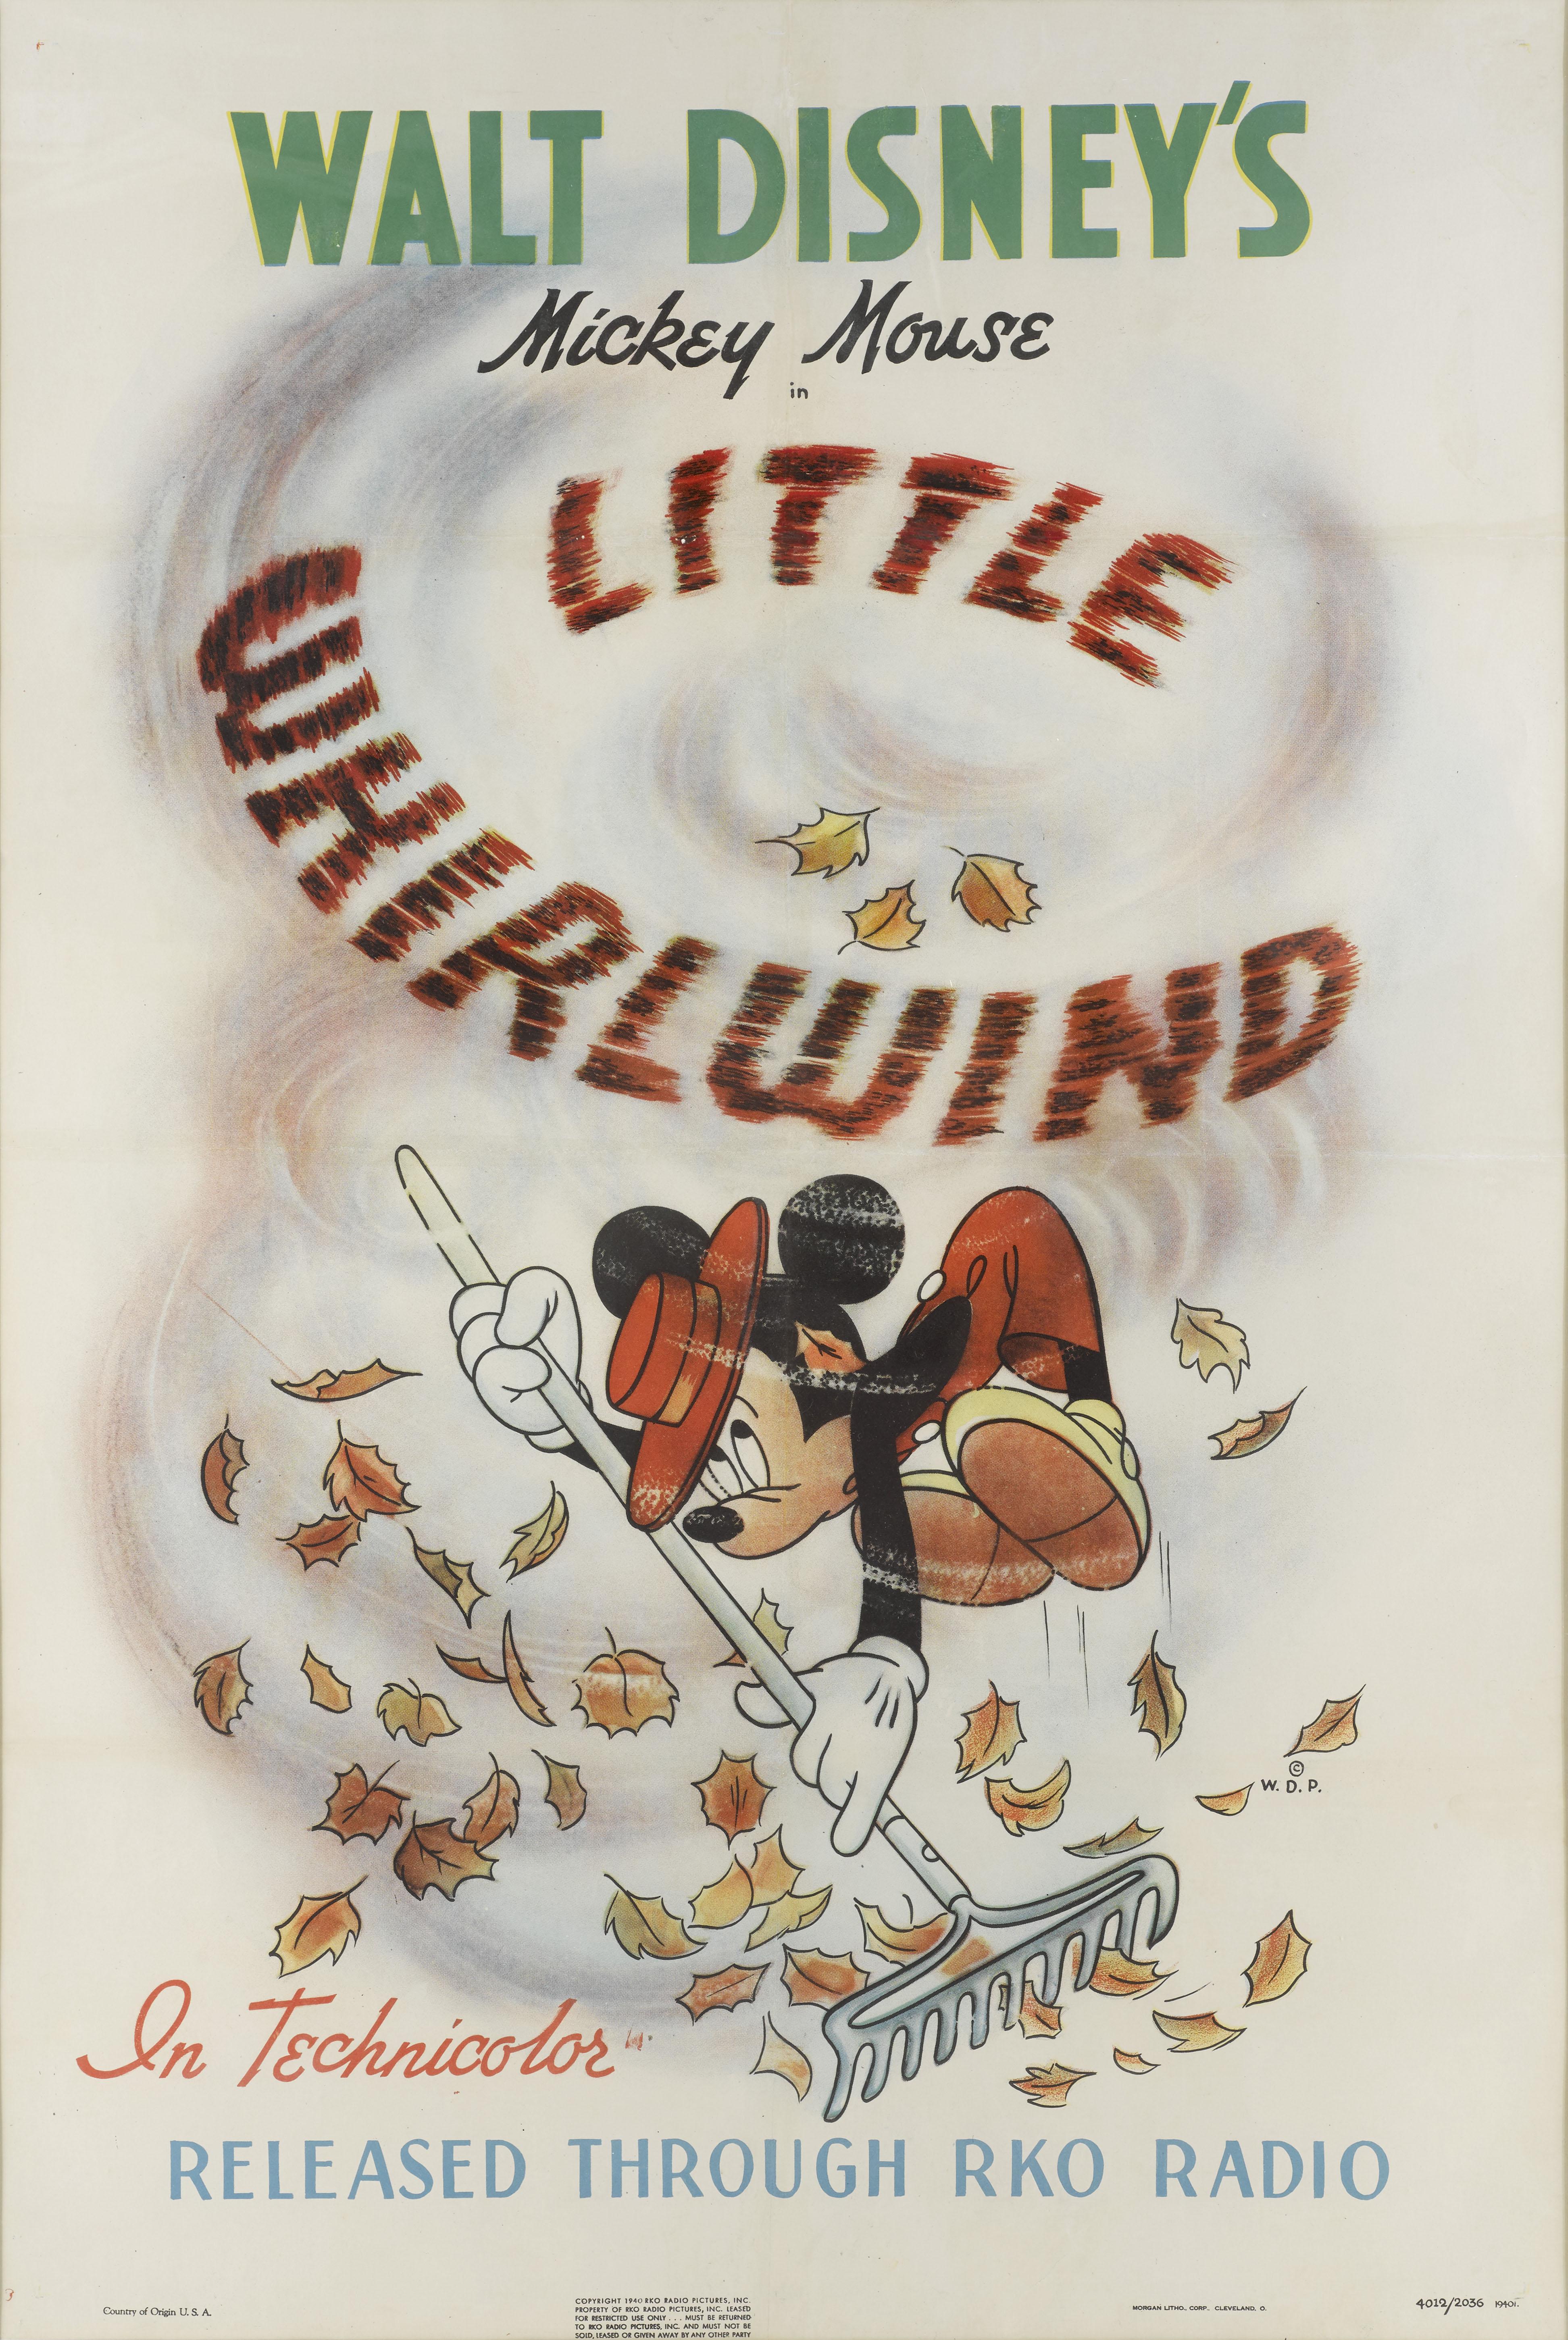 Original US film poster for Walt Disney's 1941 short animation.
This is an exceptionally fare poster for the 1941 Mickey Mouse short.
There are belived to be no more than five of these posters known to have survived.
The poster is conservation